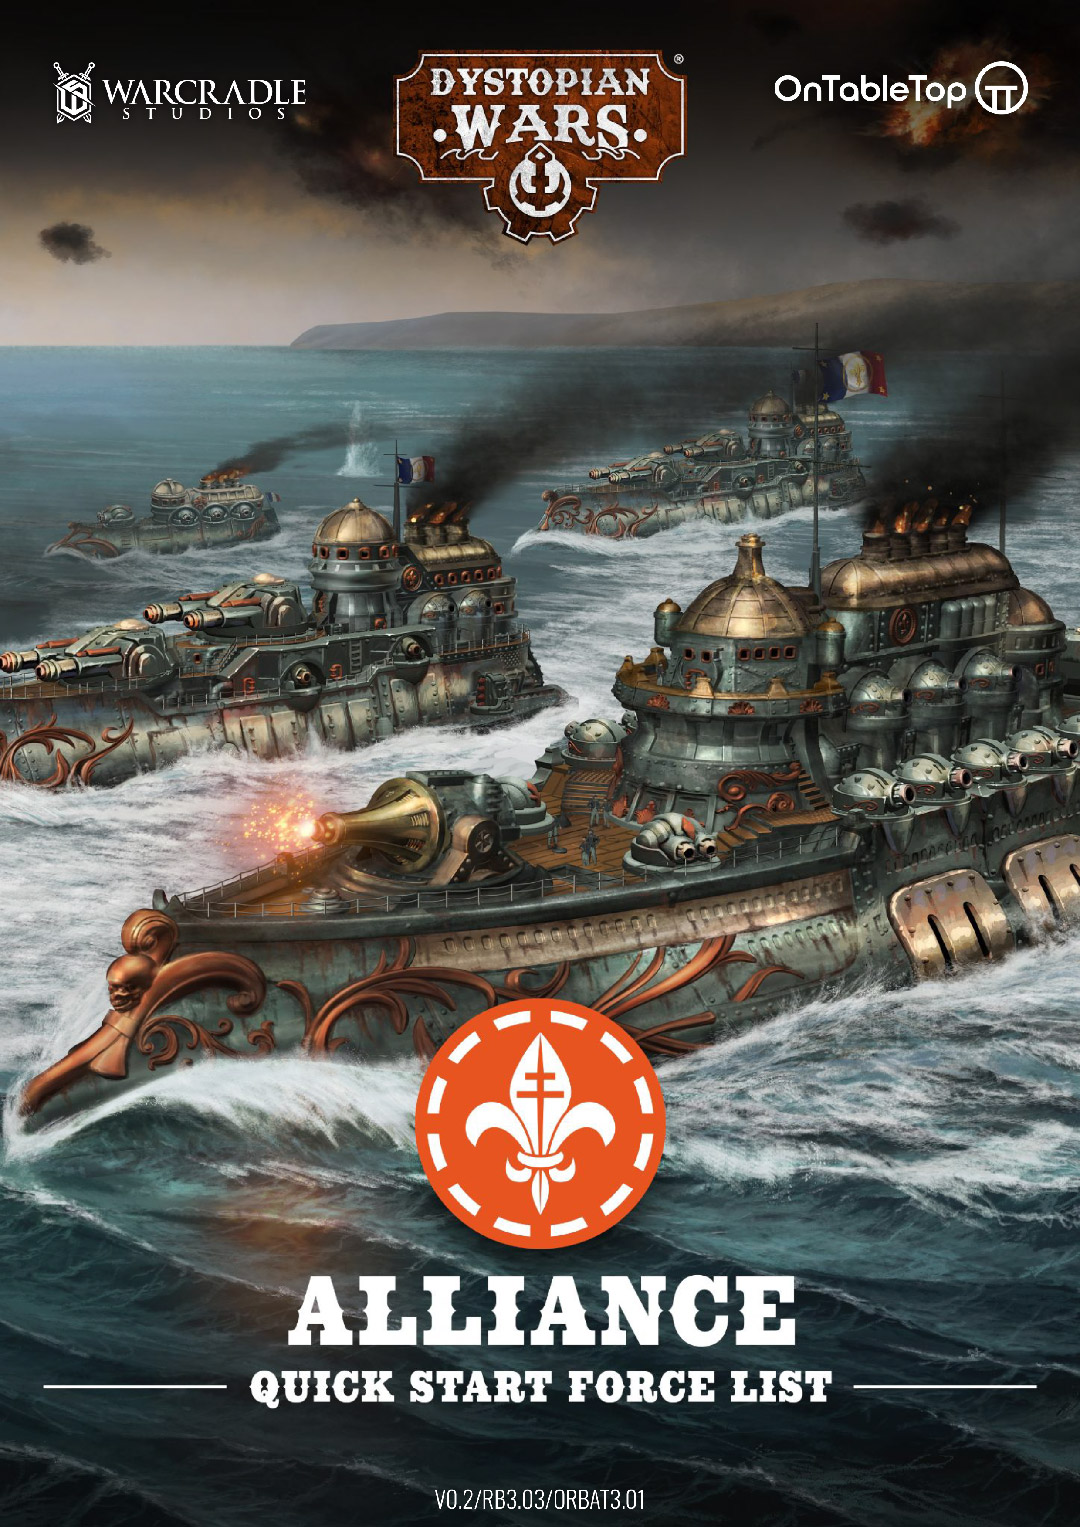 Alliance-Dystopian-Wars-Quick_Start_Force_List-Cover